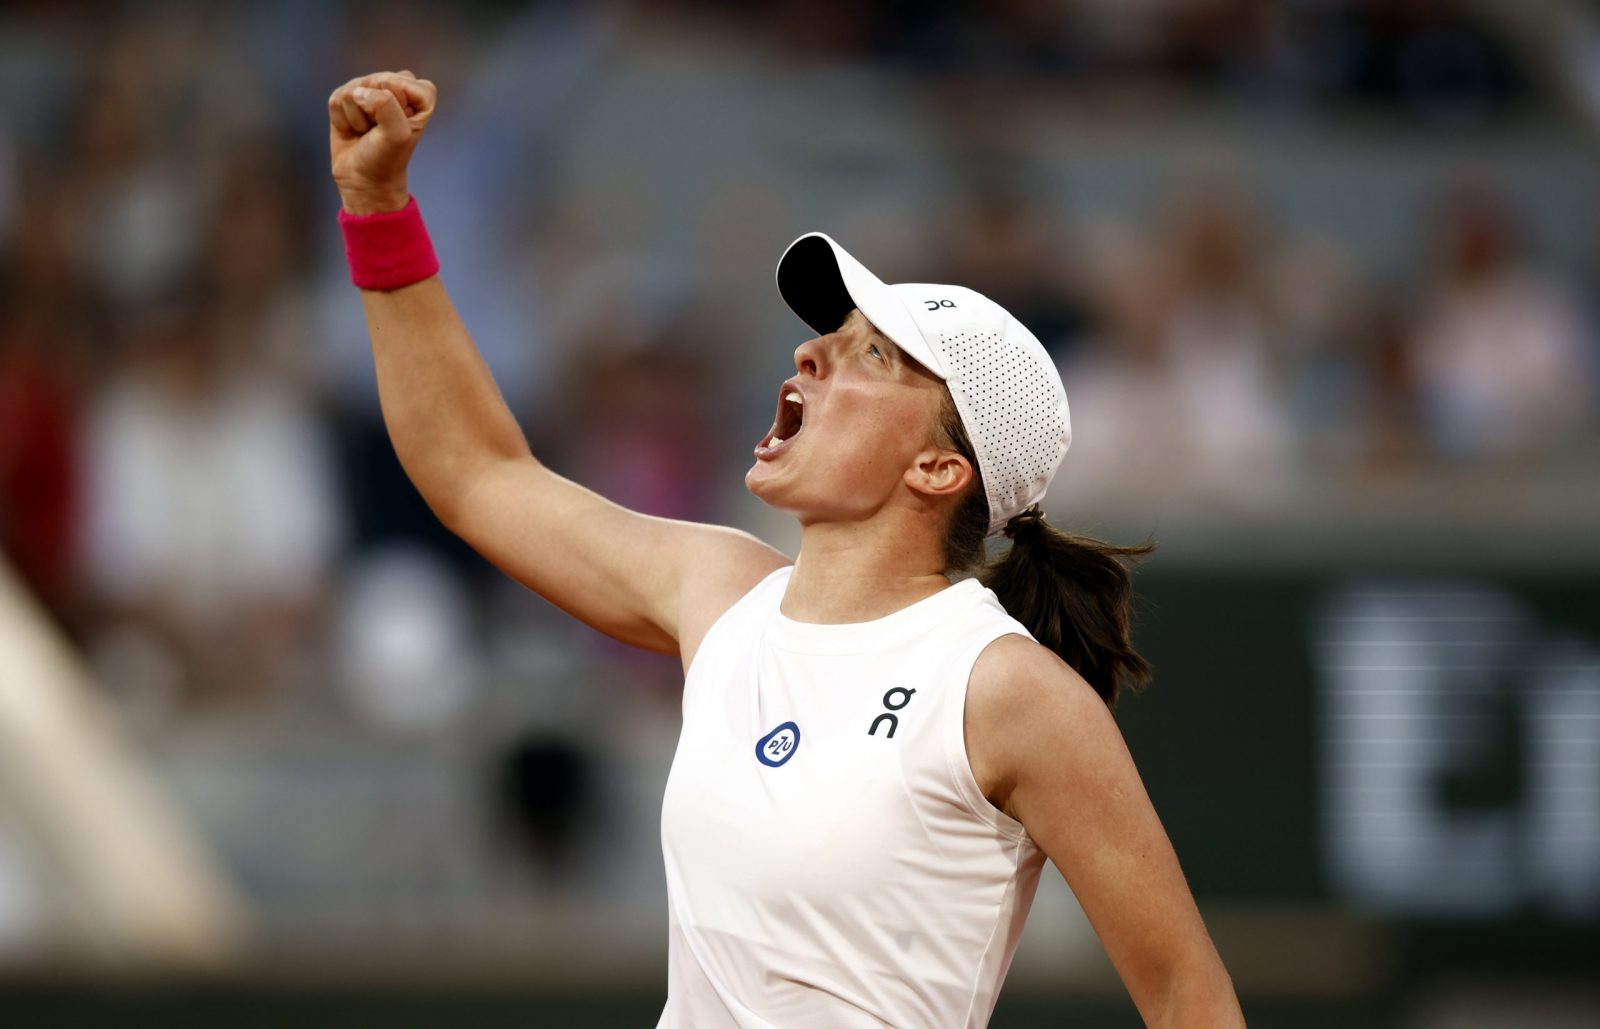 epa10680310 Iga Swiatek of Poland reacts after winning against Beatriz Haddad Maia of Brazil in their Women's semi final match during the French Open Grand Slam tennis tournament at Roland Garros in Paris, France, 08 June 2023  EPA/YOAN VALAT